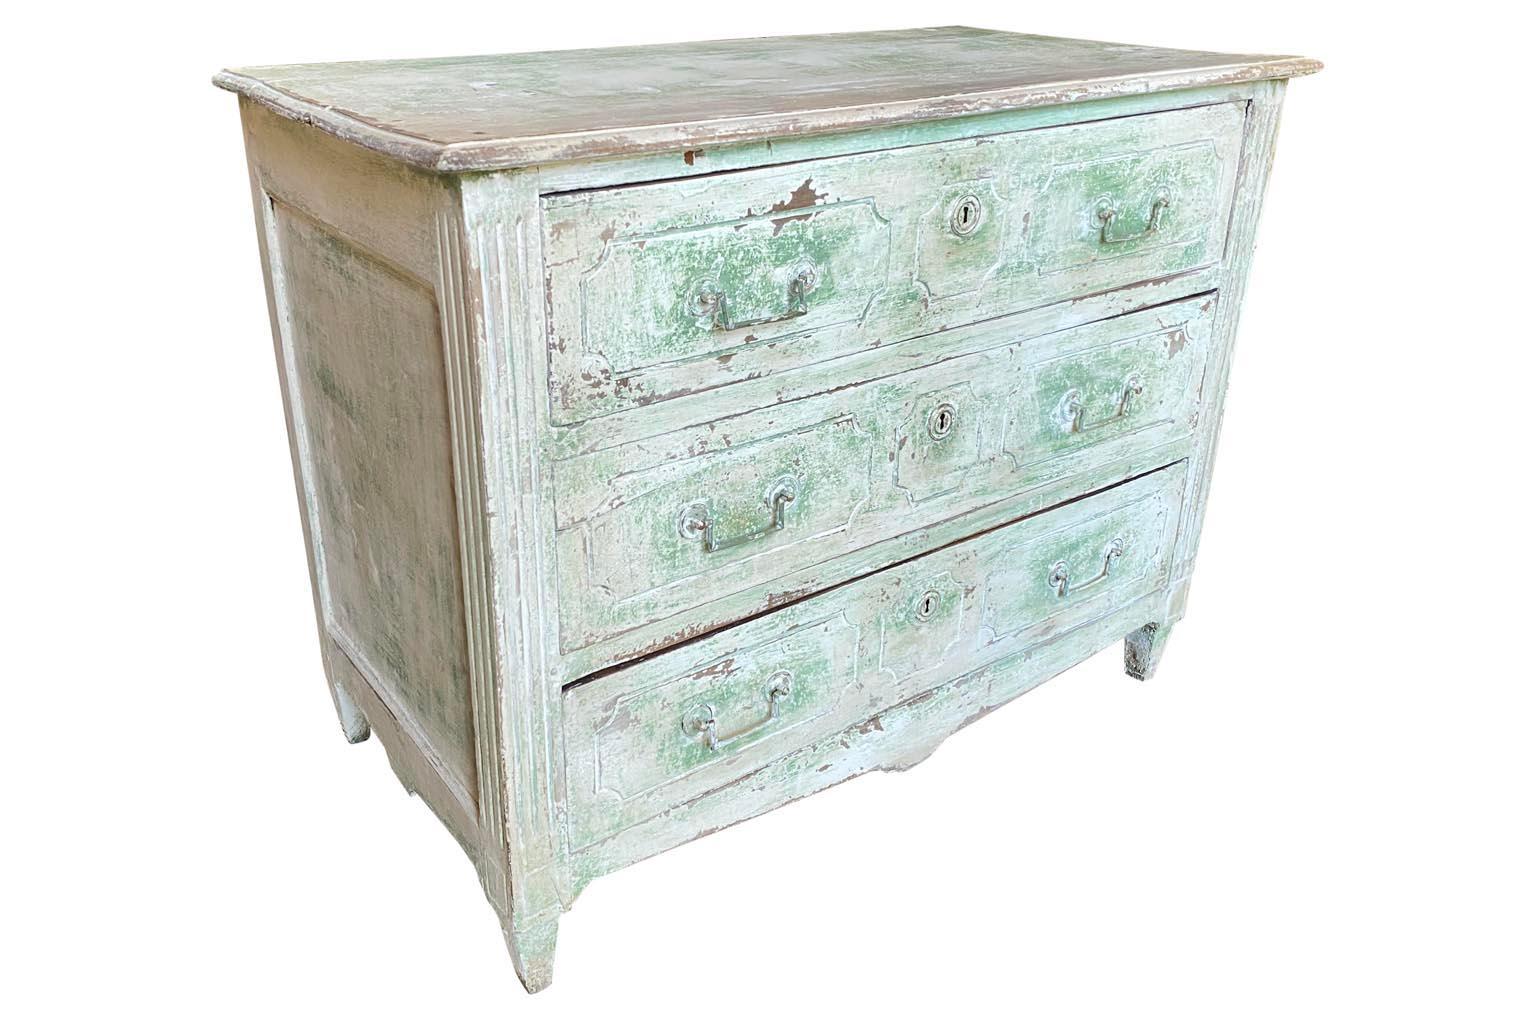 A very lovely 18th century Louis XVI period commode in painted wood with three drawers over tapered feet origining from the South of France. Wonderful painted finish.